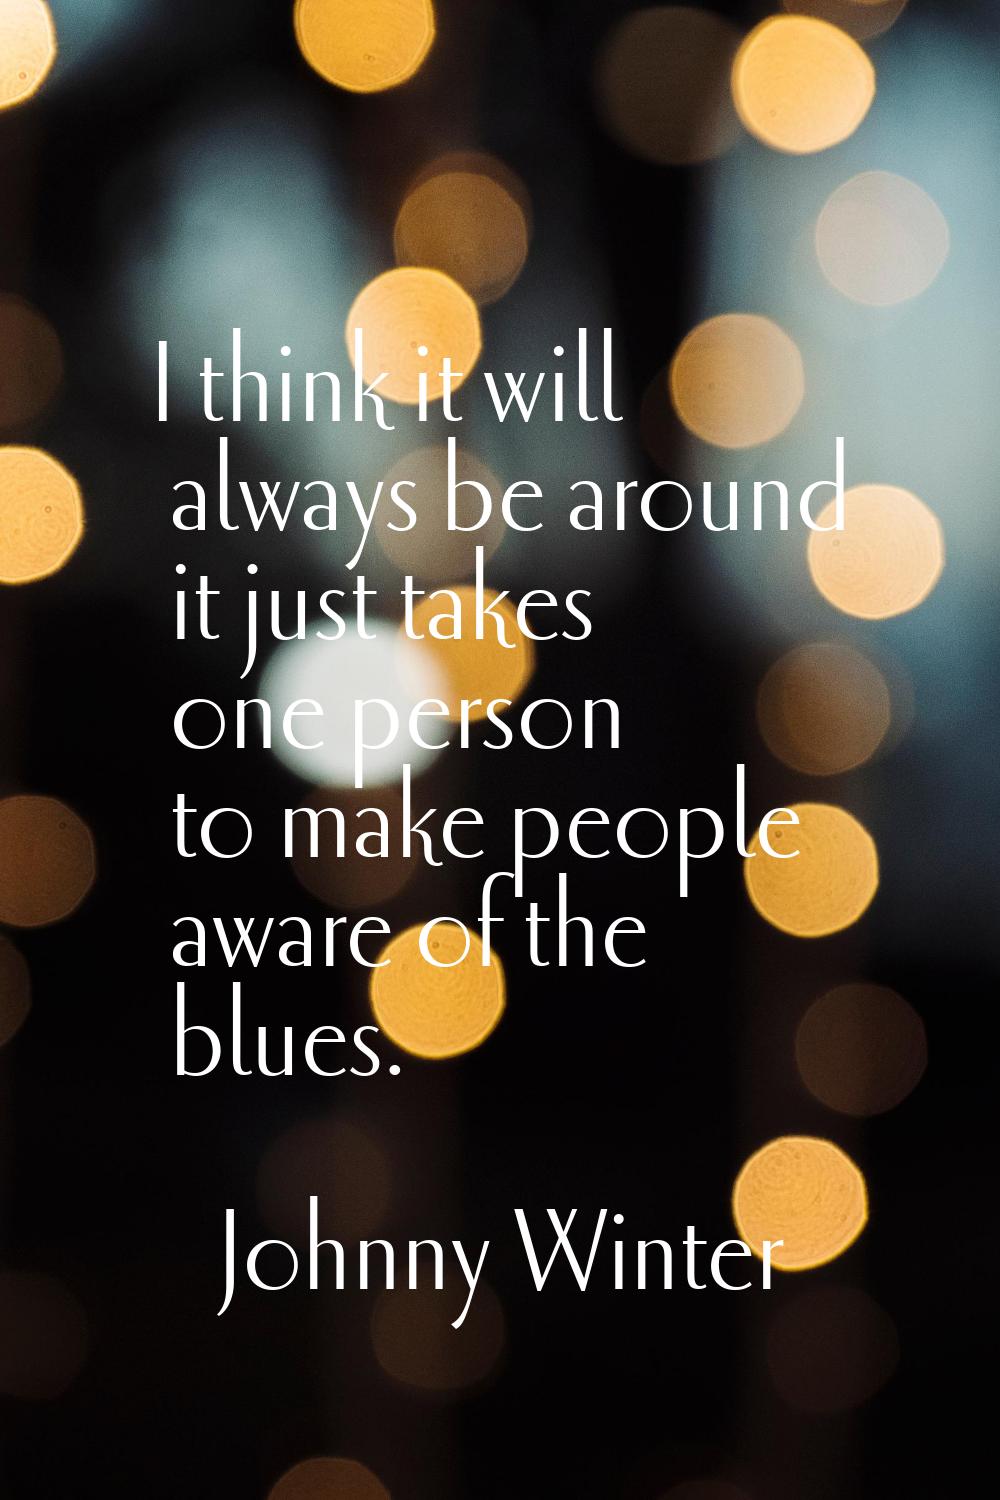 I think it will always be around it just takes one person to make people aware of the blues.